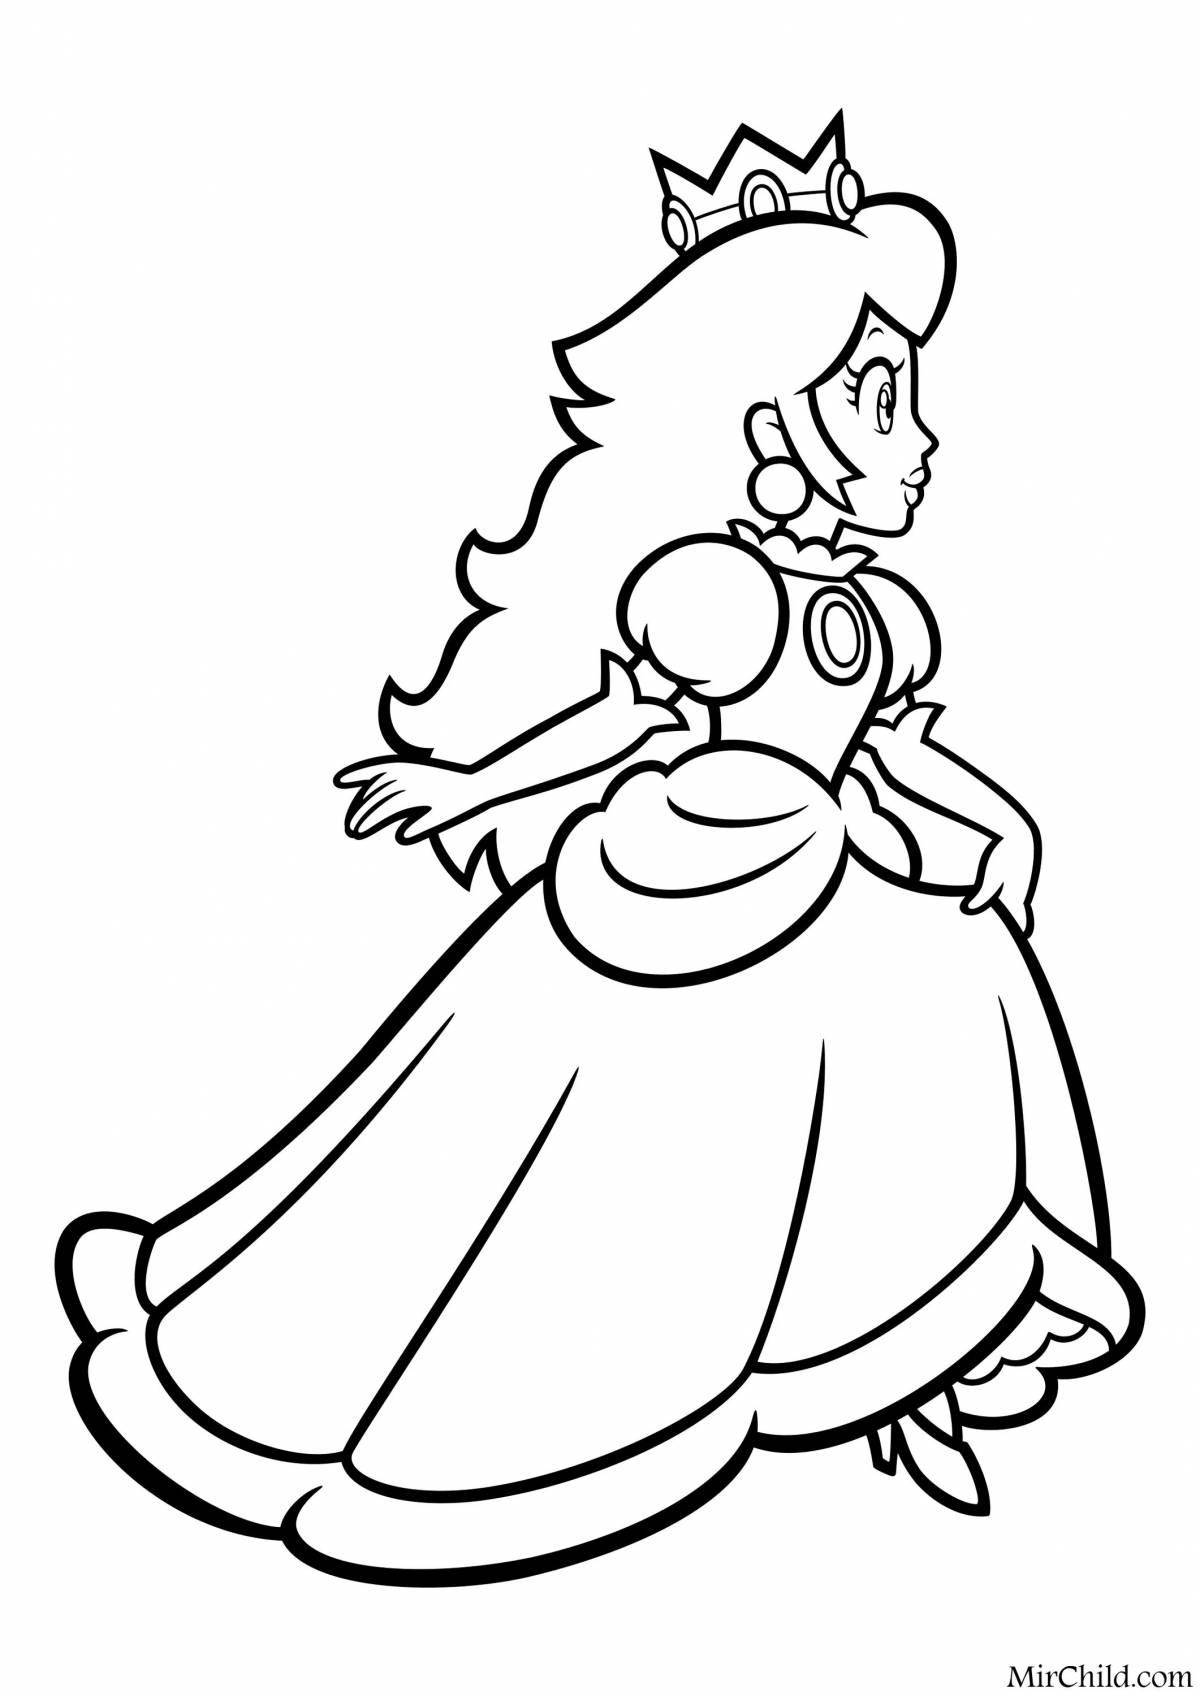 Charming peach coloring book